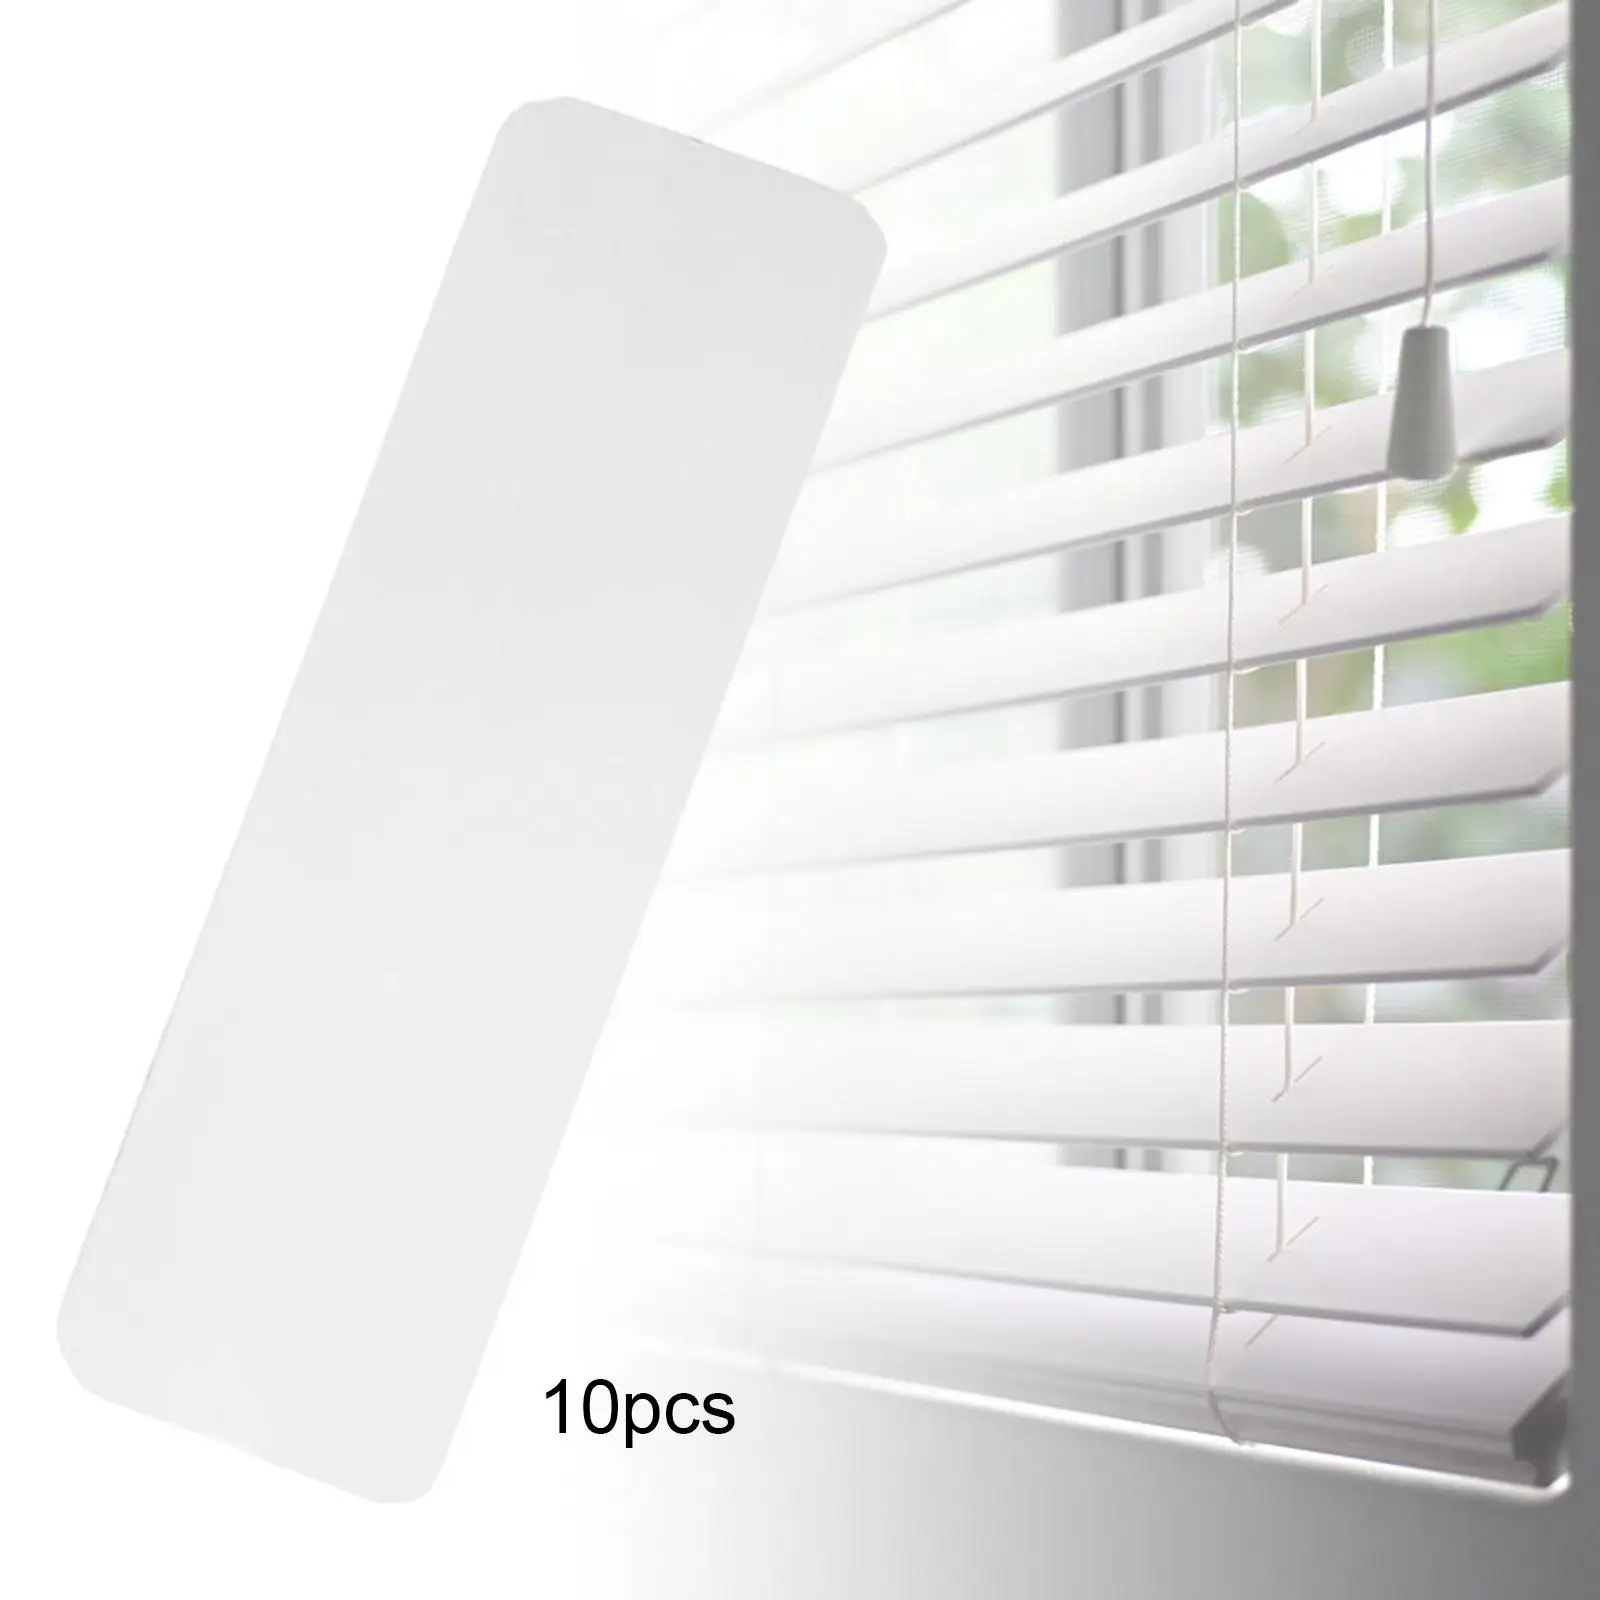 10 Pieces Blinds Repair Tabs Louver Repair Tool DIY Horizontal Binds Repair Patch Blinds Fixers for Classroom Office Study Room